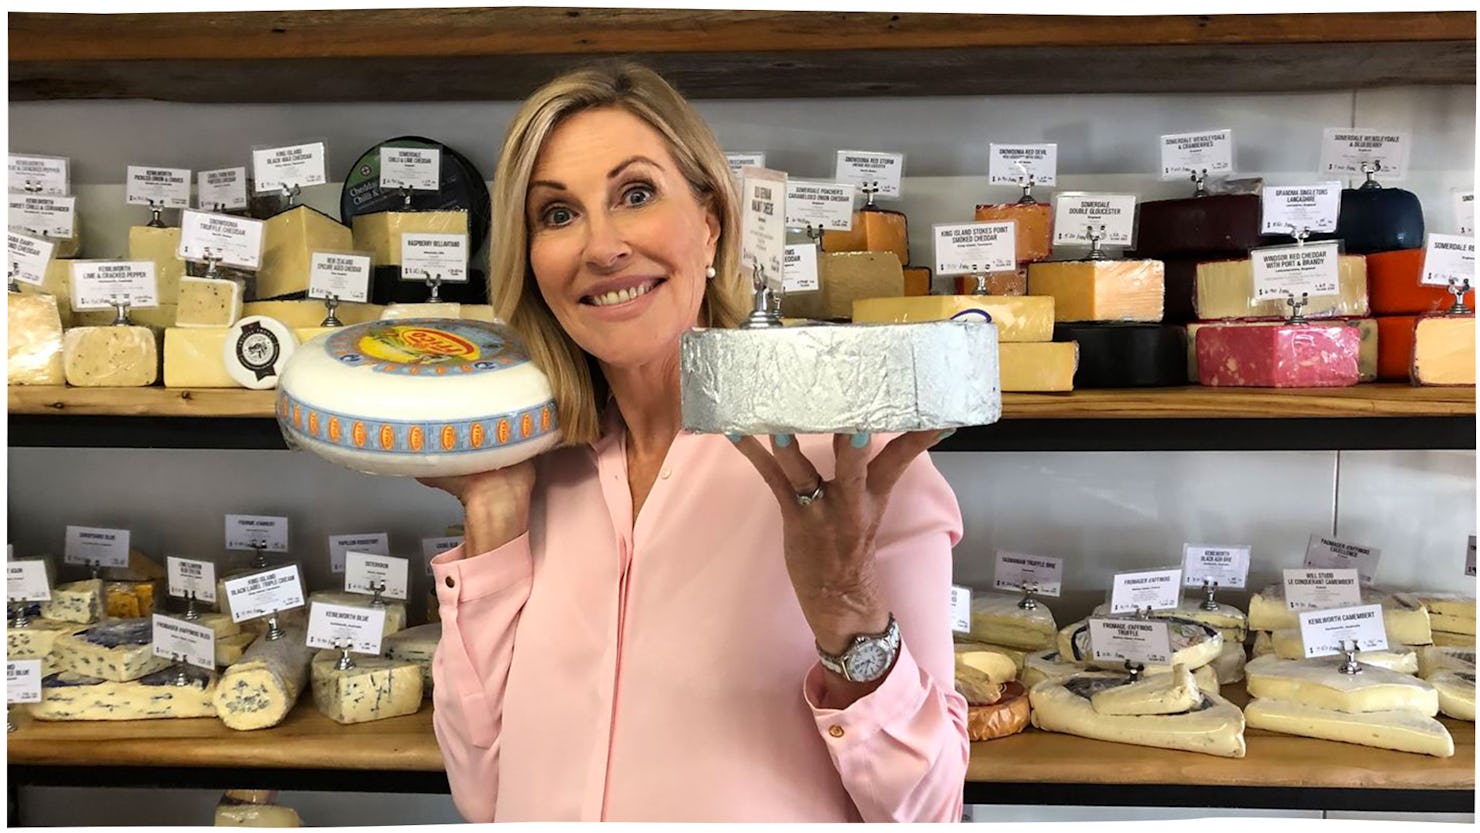 7 Weekender presenter Kay McGrath explores the fromagerie at Maleny Food Co